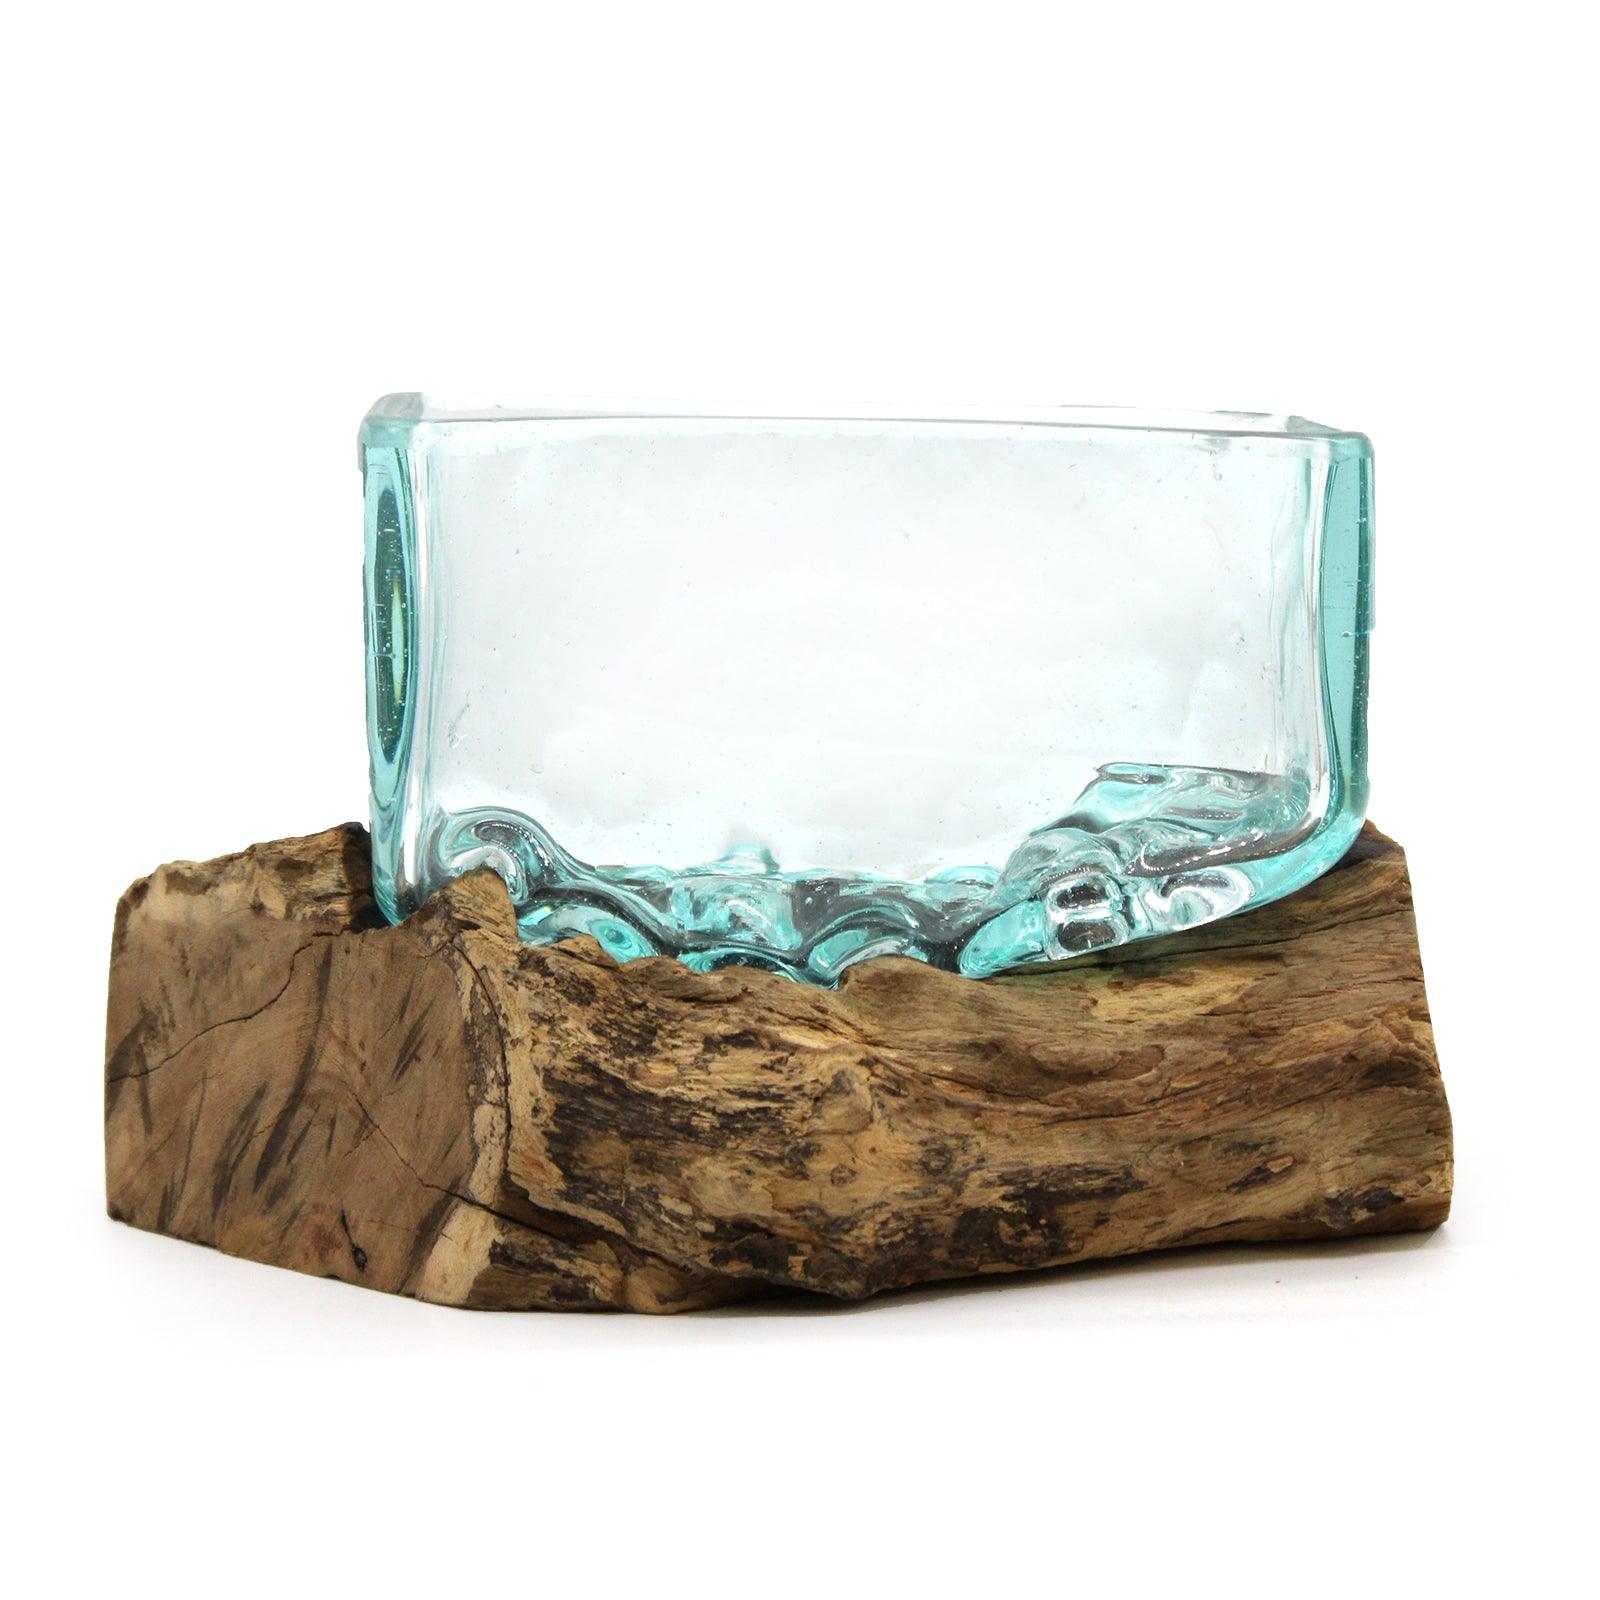 Molten Glass Tank on Wood with Stand - Medium Bowl - Charming Spaces